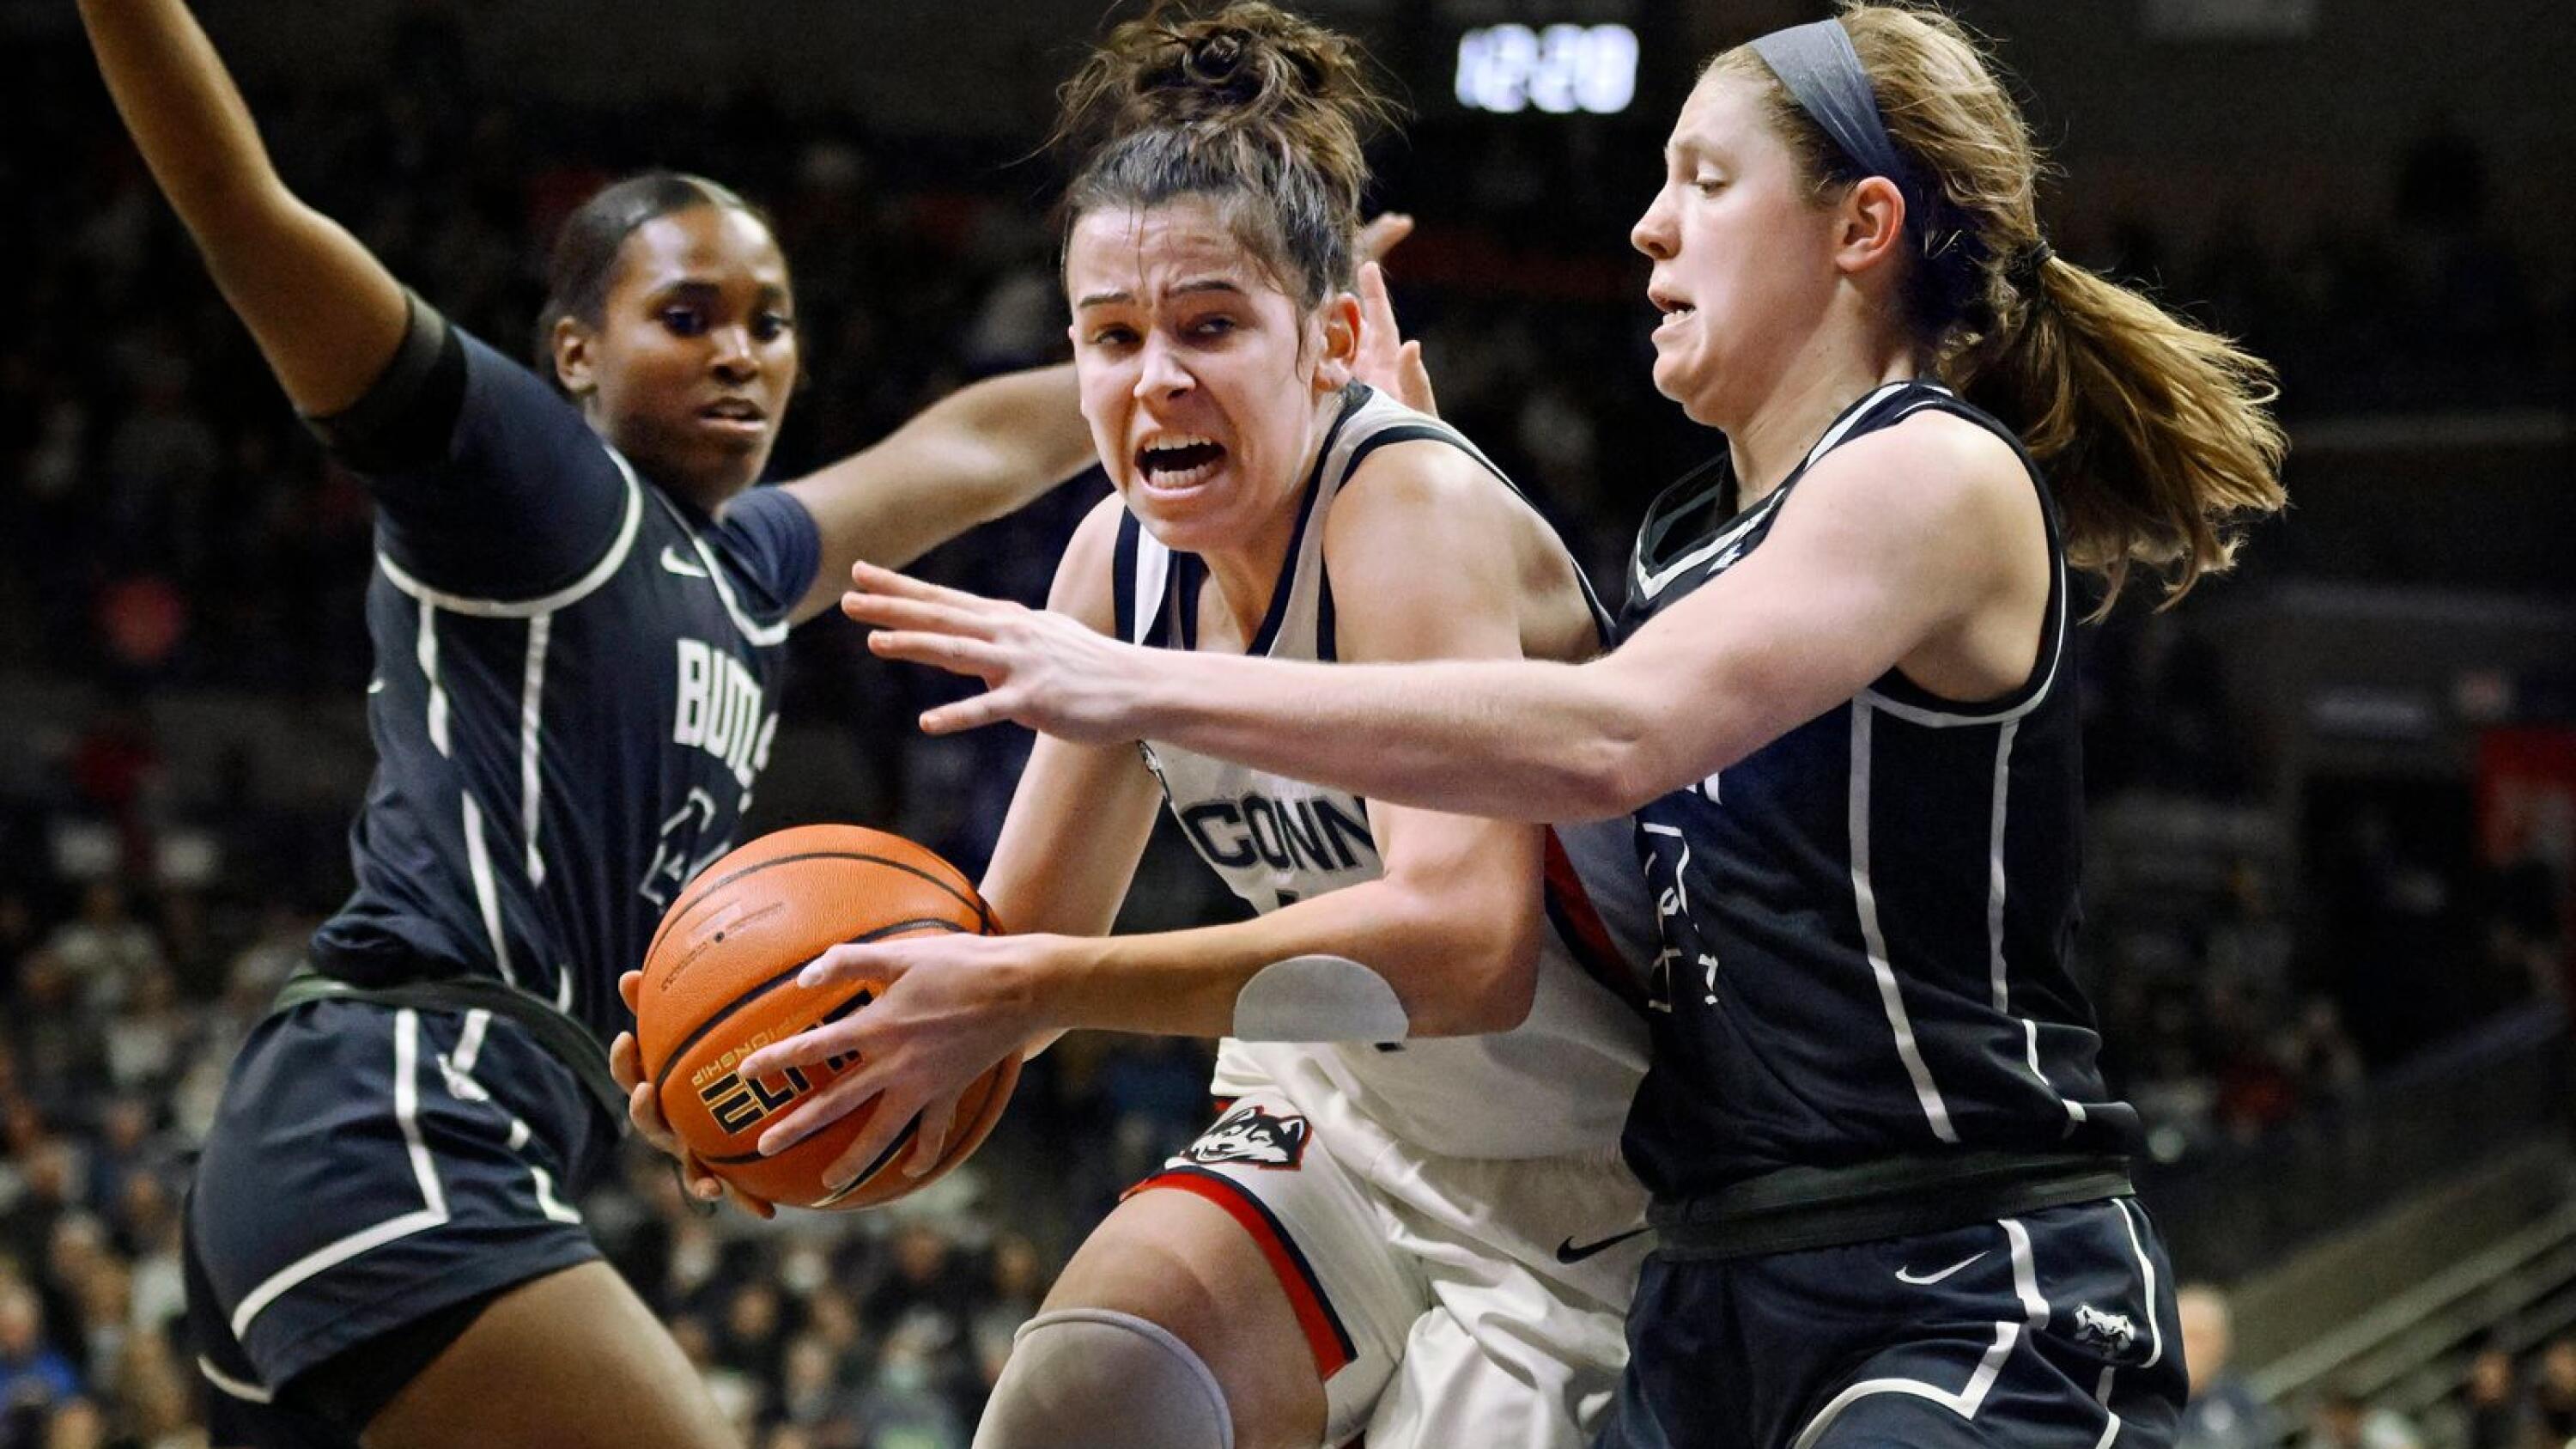 UConn Women's Basketball eases their way past Butler, 79-39 